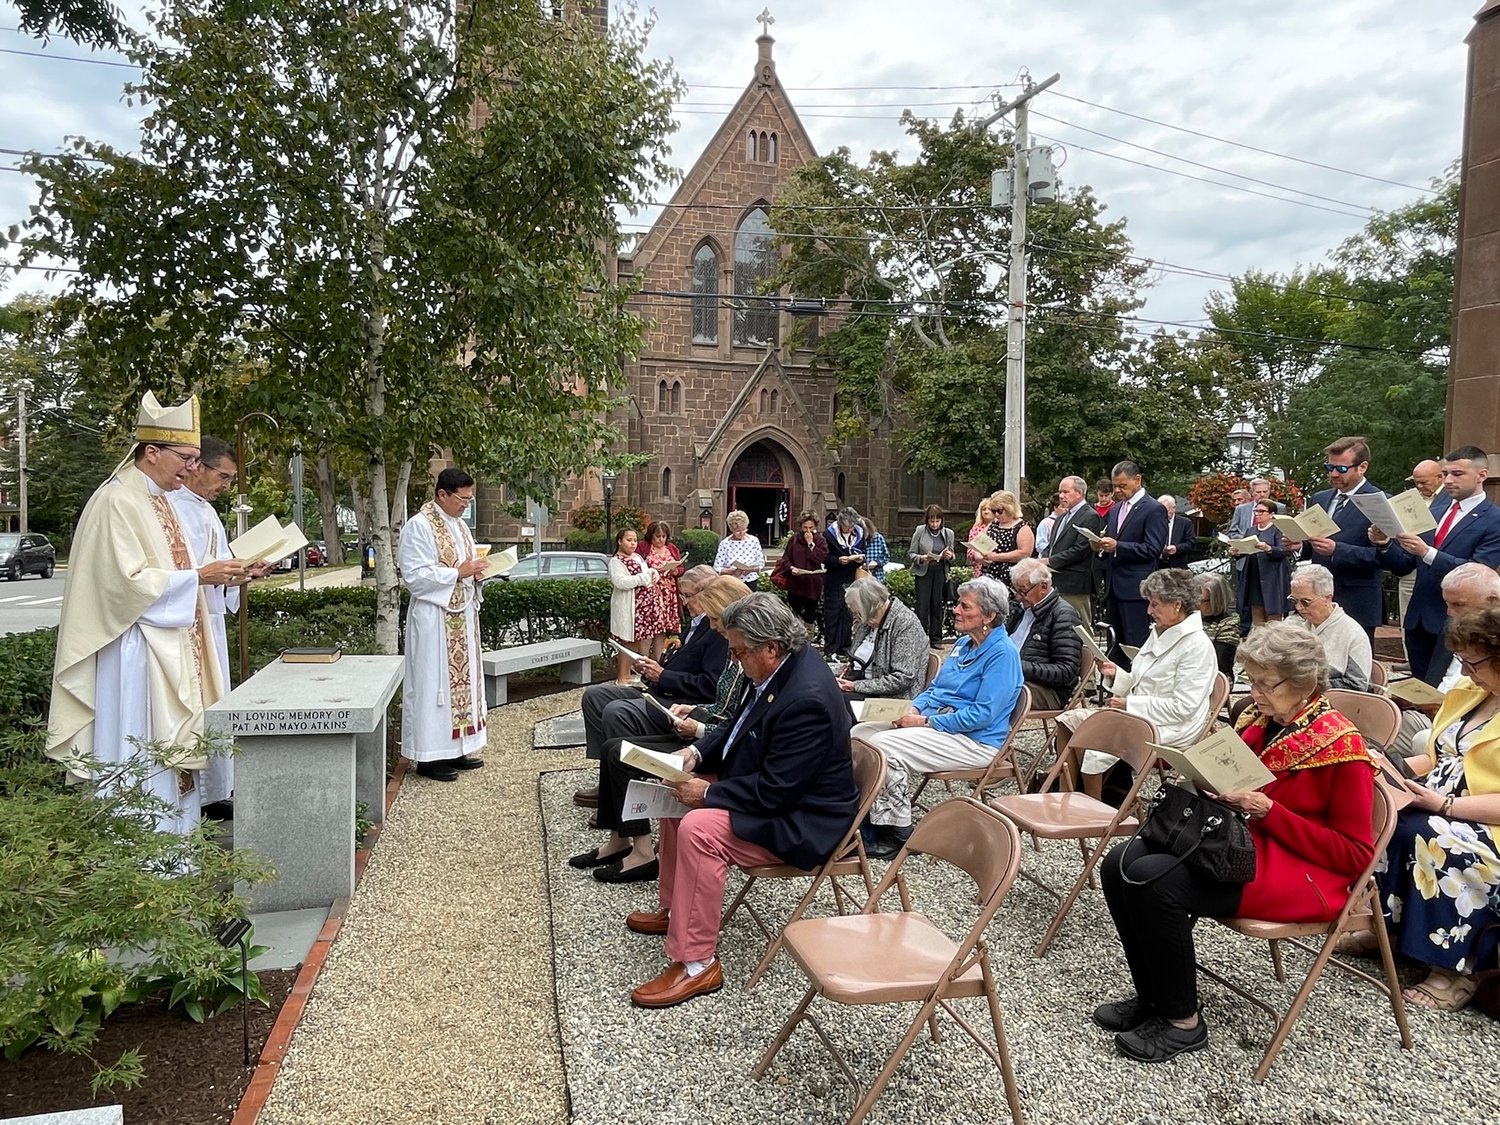 St. Michael’s parishioners gathered for the rededication of their redesigned Memorial Garden. Presiding over the service was Right Revd. Nicholas Knisely, Bishop of the Episcopal Diocese of Rhode Island; the Revd. Deacon James Kelliher, the Bishop’s Chaplain; and the Revd. Canon Michael J. Horvath, Rector of St. Michael’s.